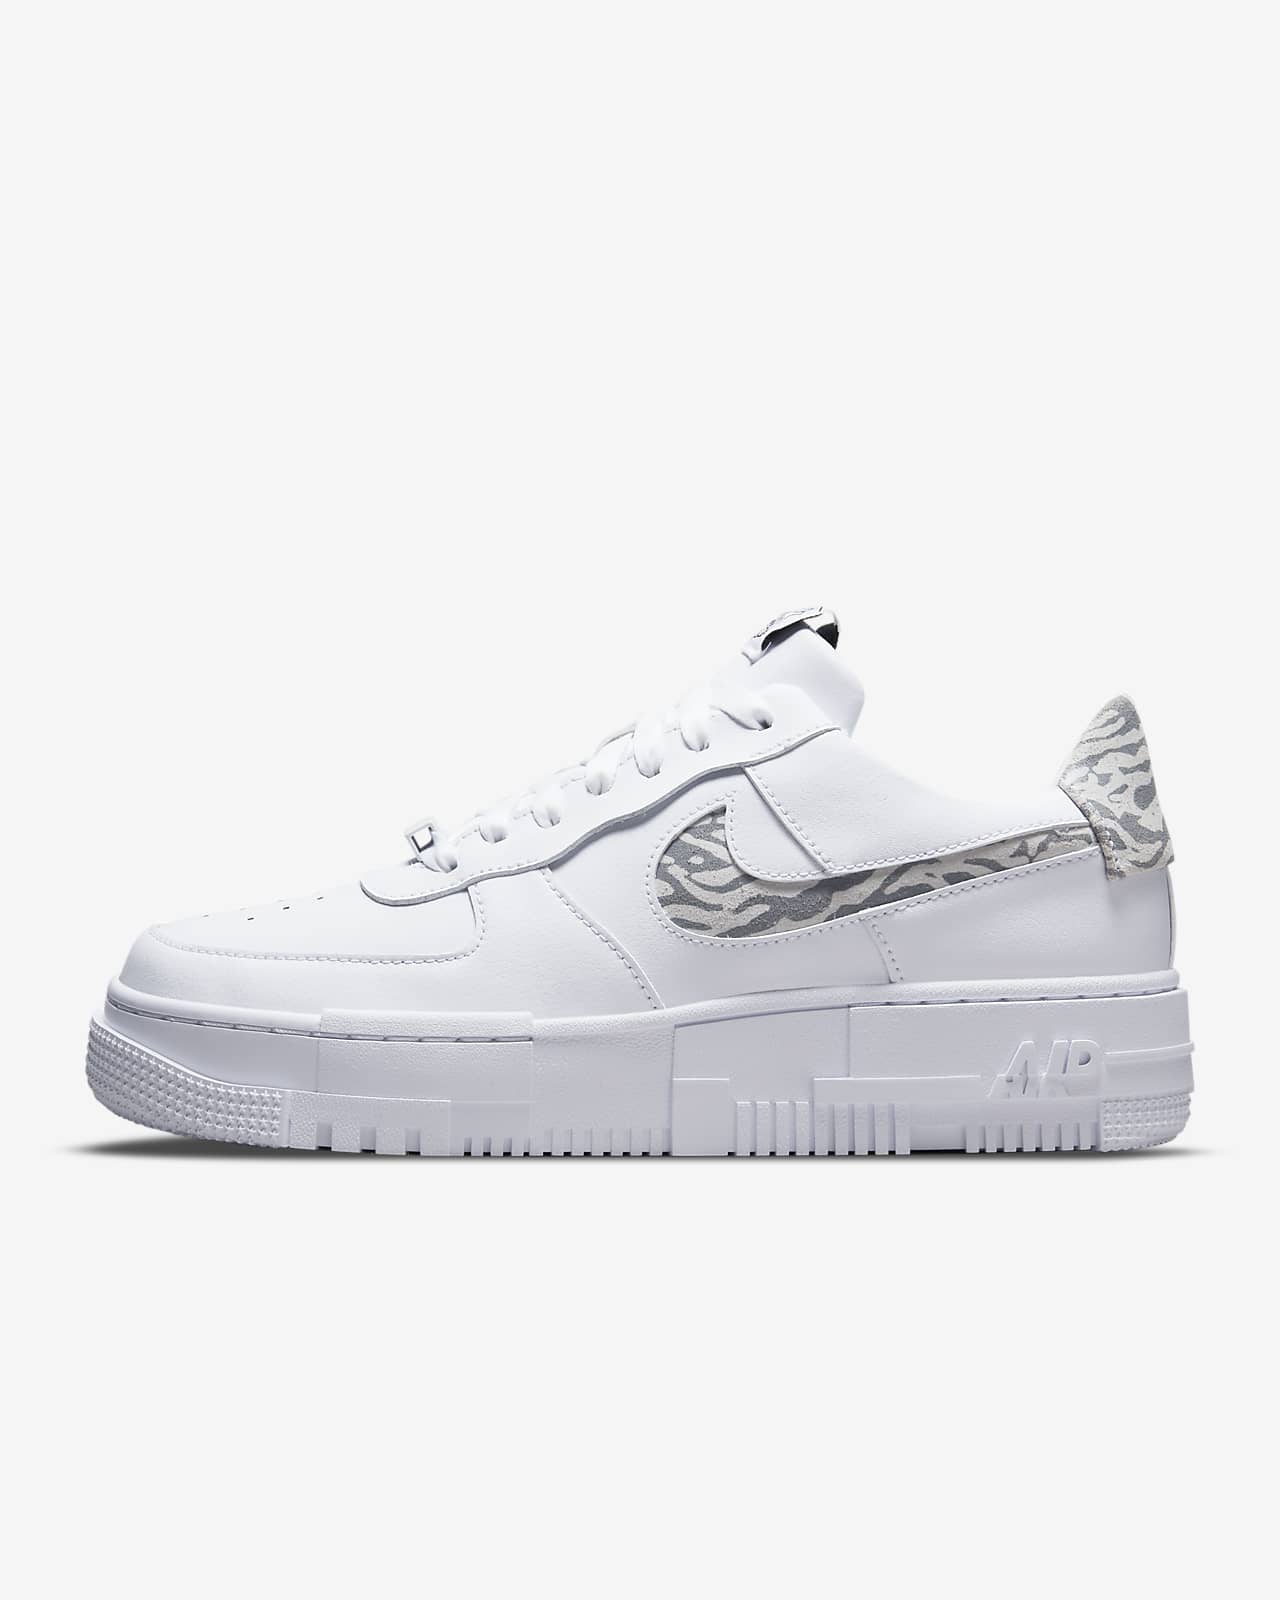 Chaussures Nike Air Force 1 Pixel SE pour Femme. Nike LU